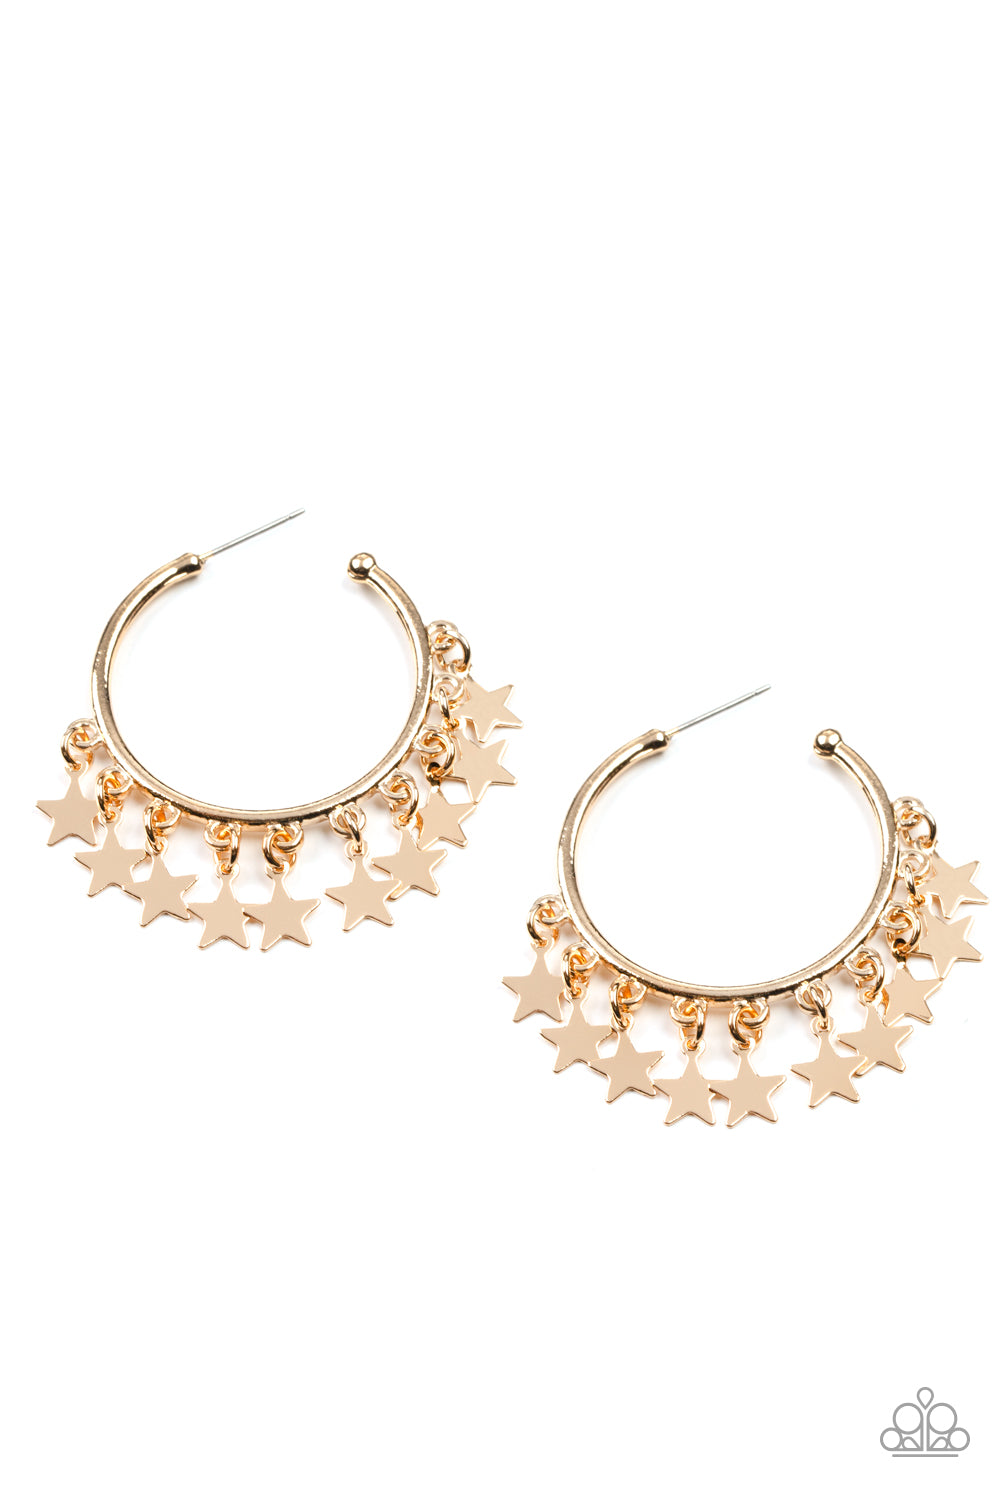 Happy Independence Day - Gold Hoop Earrings - Princess Glam Shop